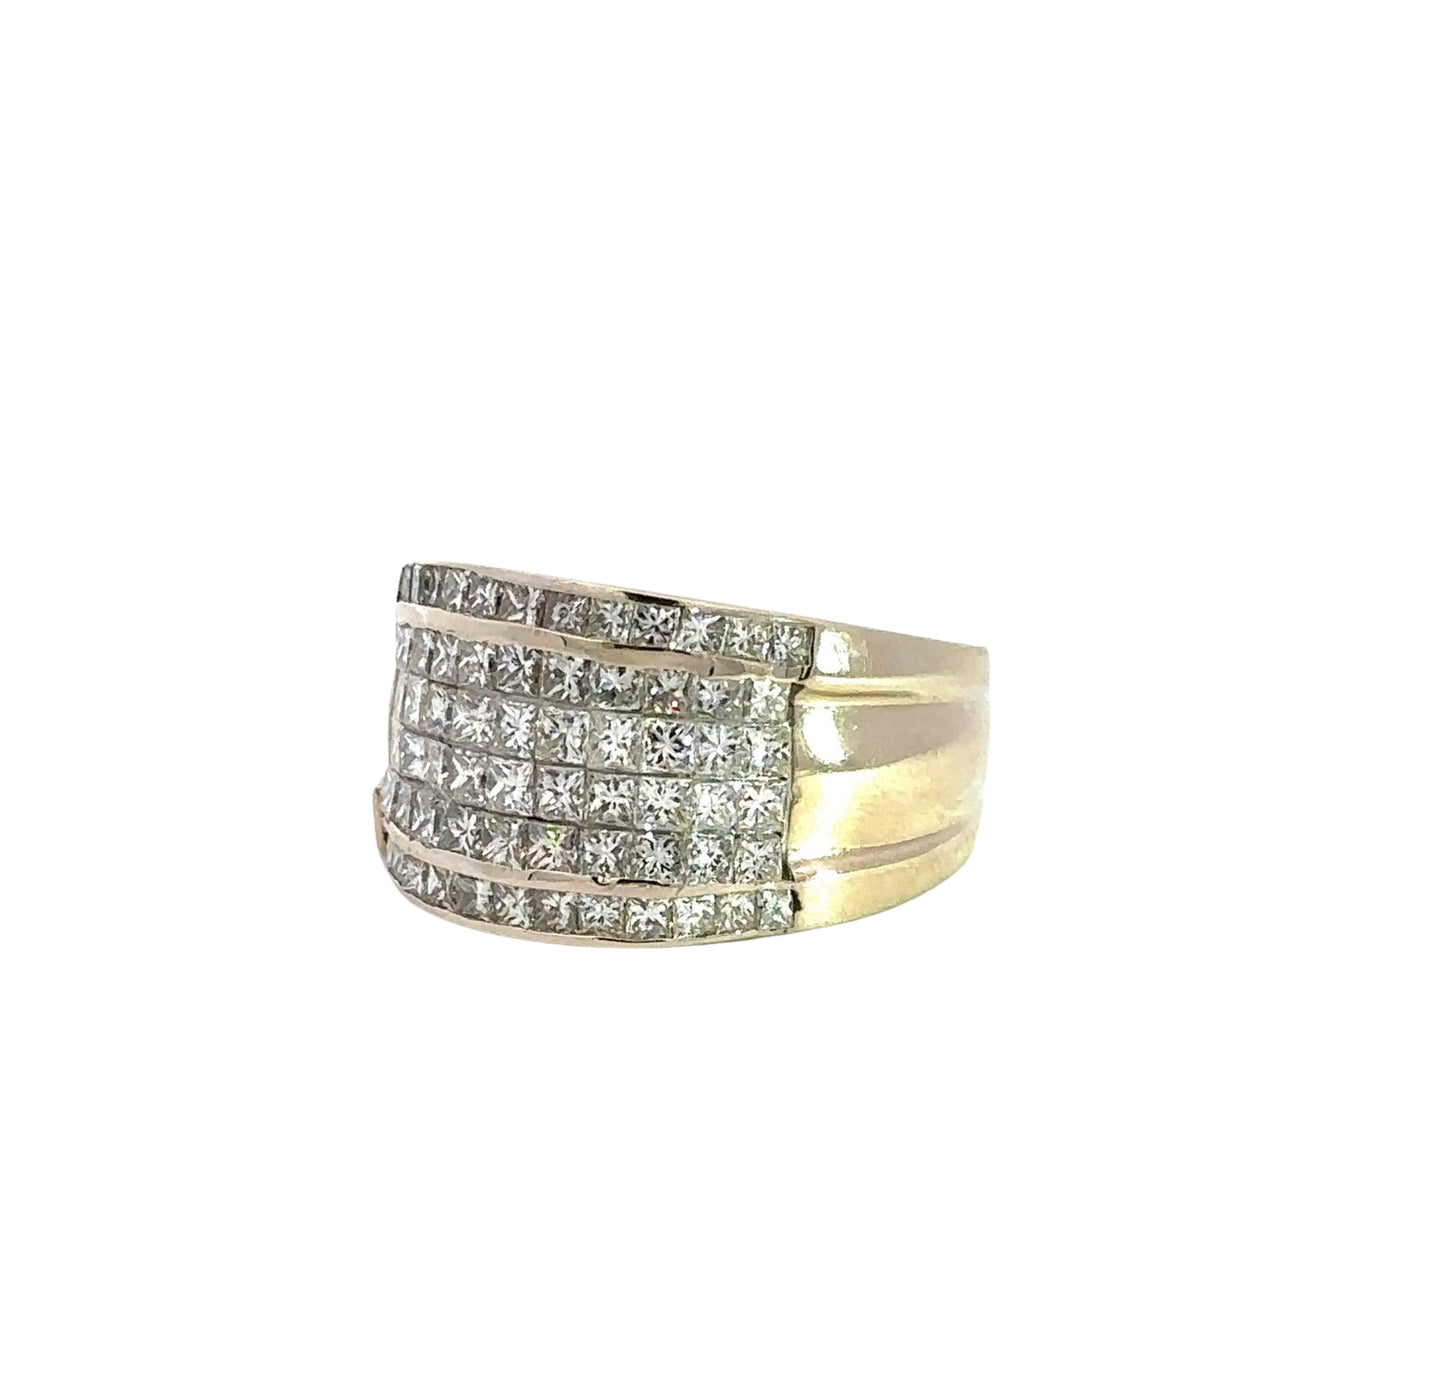 diagonal view of white gold ring with 6 rows of princess-cut diamonds